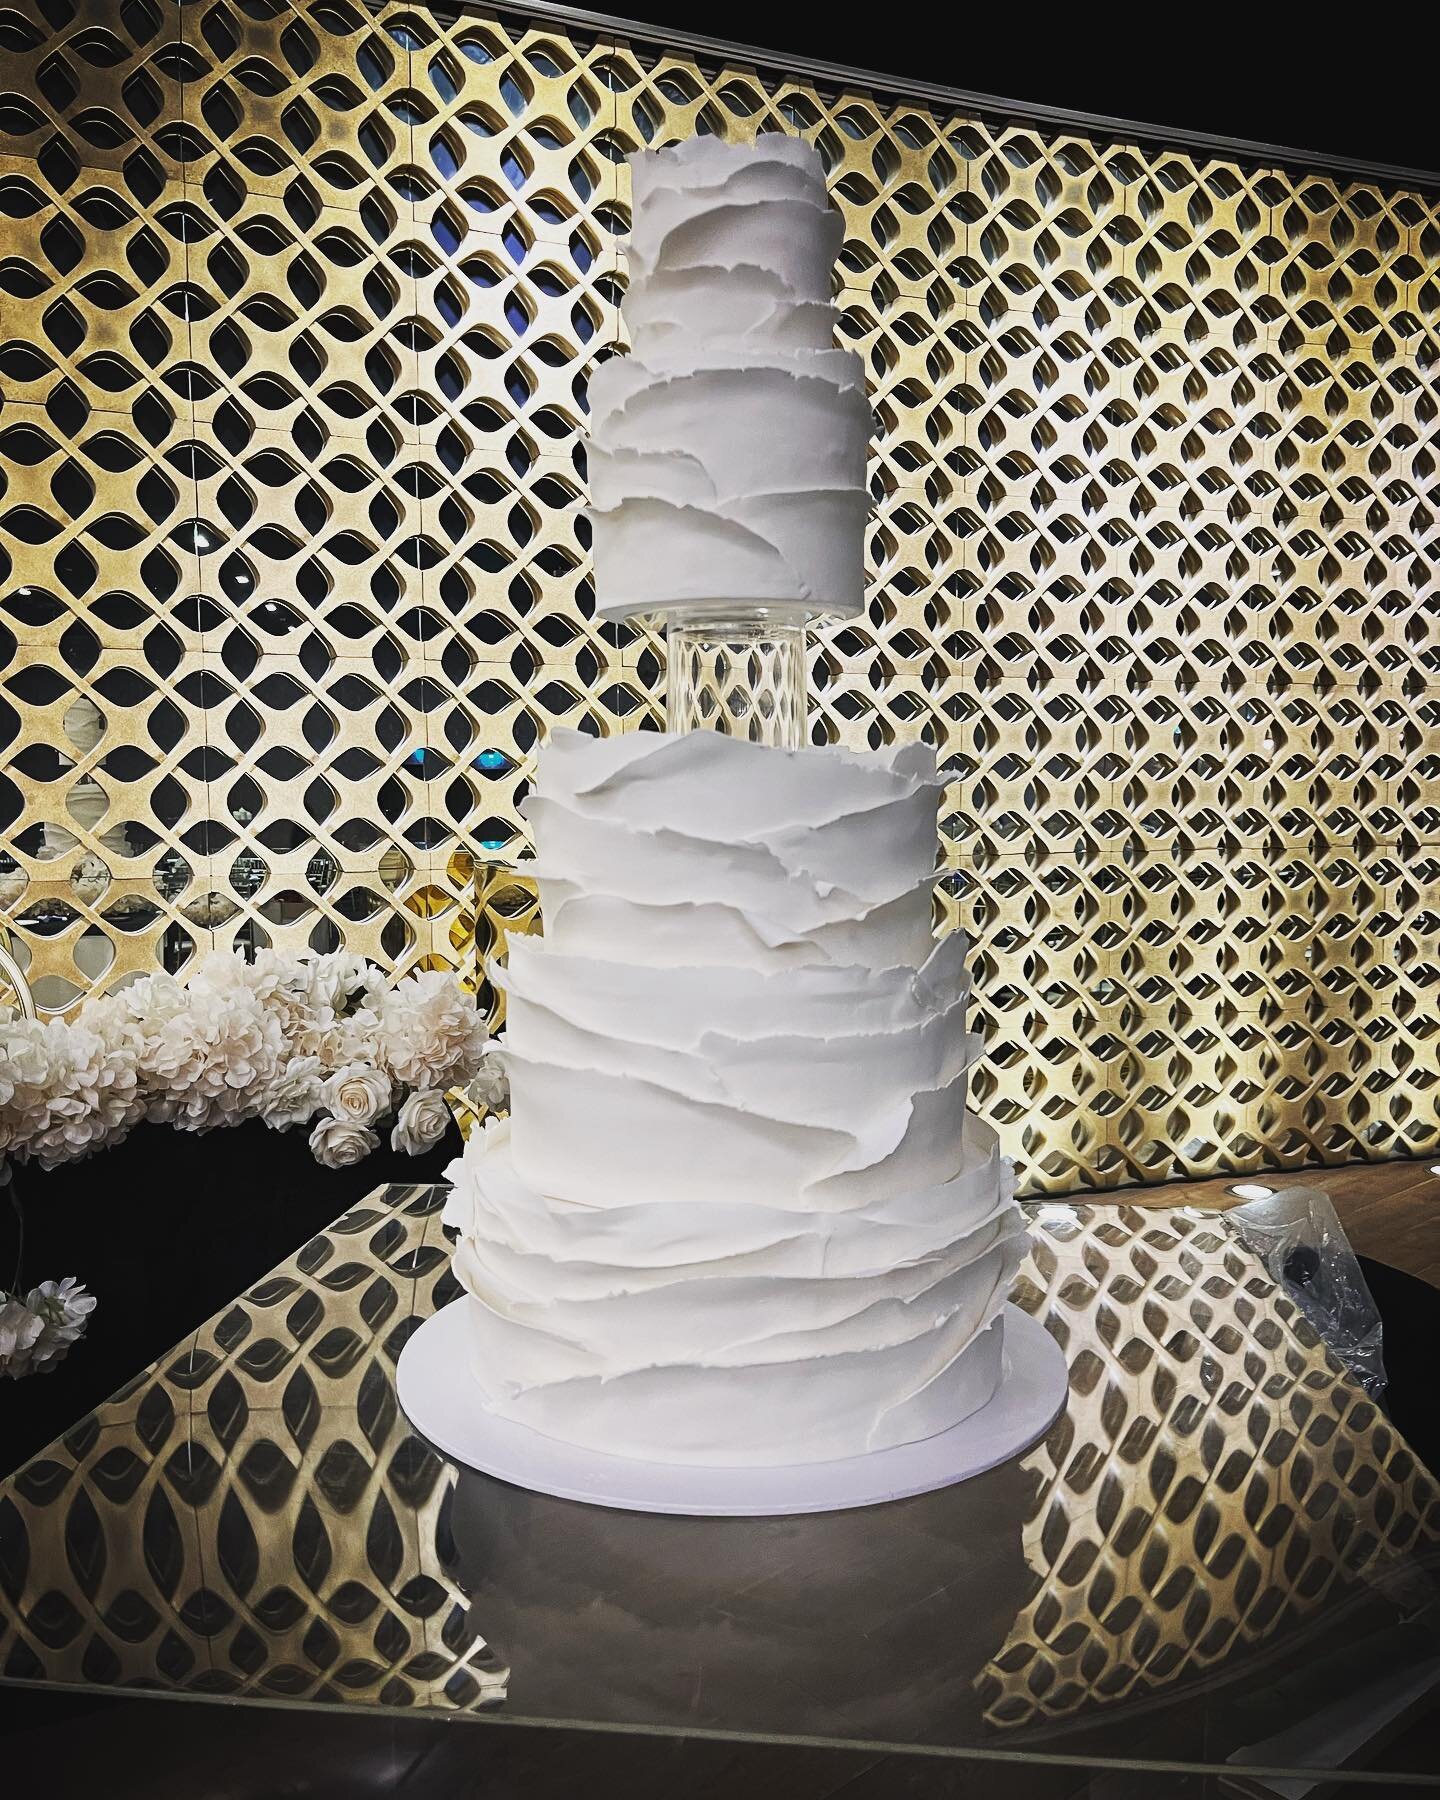 Texture, nothing more, nothing less 🤎

#cakes

#somethingbluecakes

#sydneycakes
#weddingcakes
#sydneyweddingcakes
#sydneyweddings
#whitewedding
#tieredcakes
#loveweddingcakes
#love
#marriage
#weddings